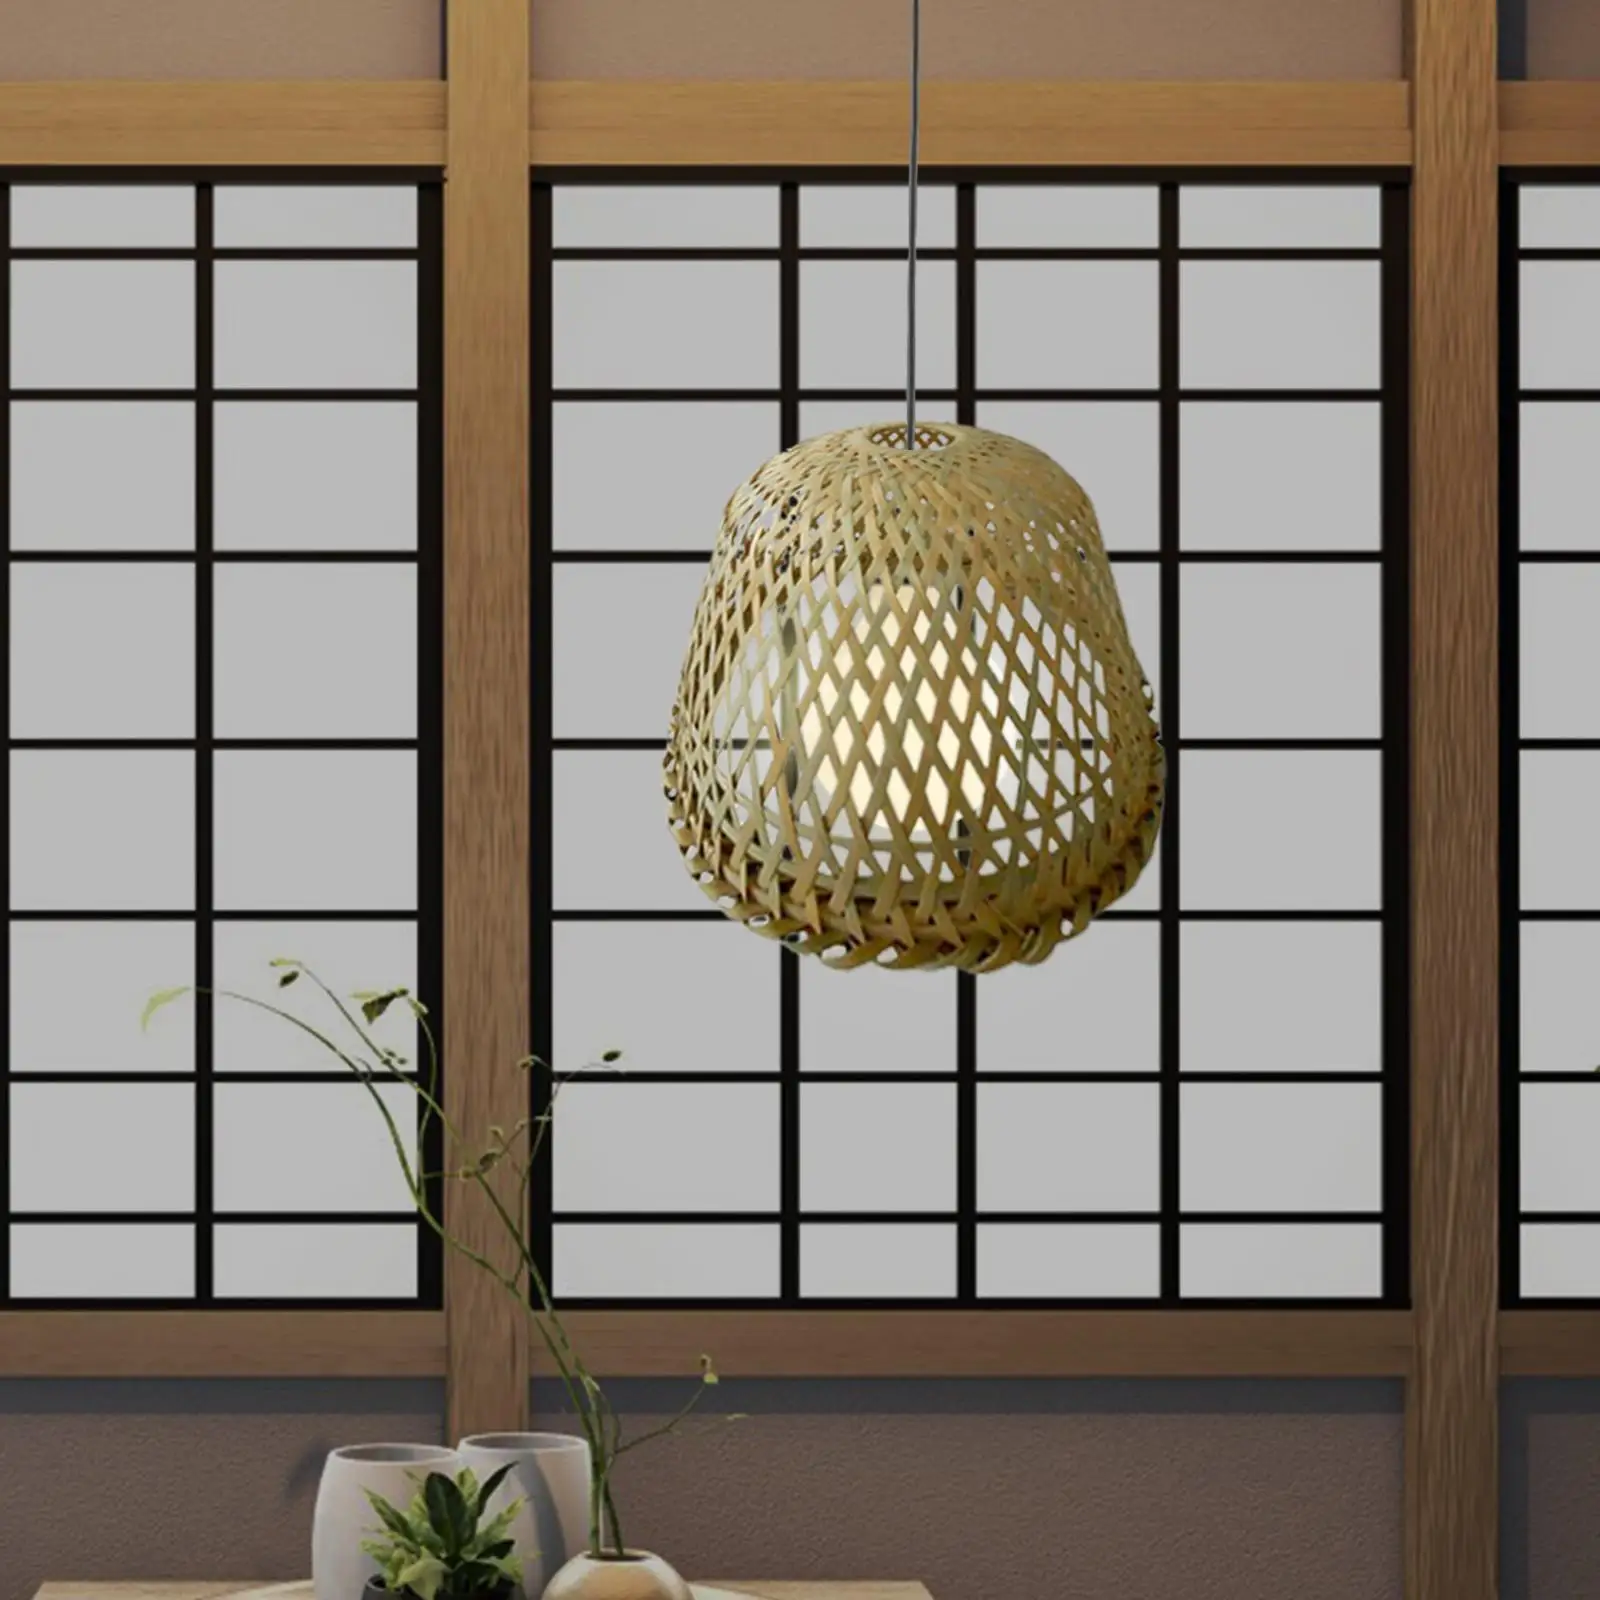 Bamboo Lamp Shade Handmade Woven Ceiling Light Fixture for Home Decorative